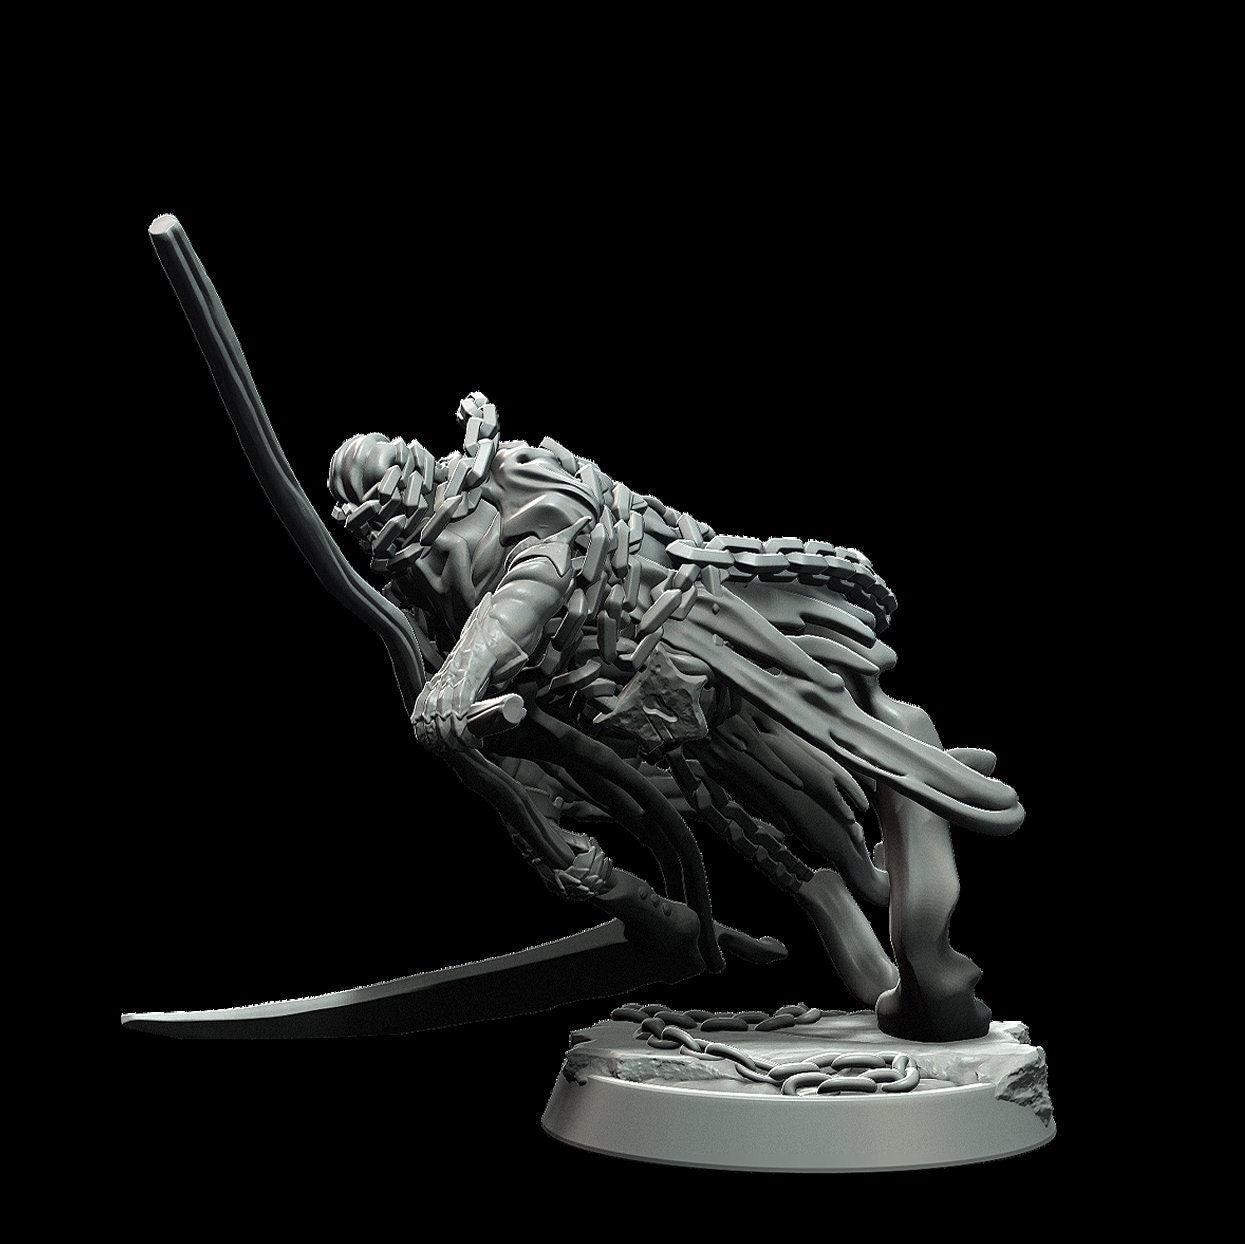 Imprisoned Soul Miniature skeleton miniature - 3 Poses - 28mm scale Tabletop gaming DnD Miniature Dungeons and Dragons, ttrpg dnd 5e - Plague Miniatures shop for DnD Miniatures